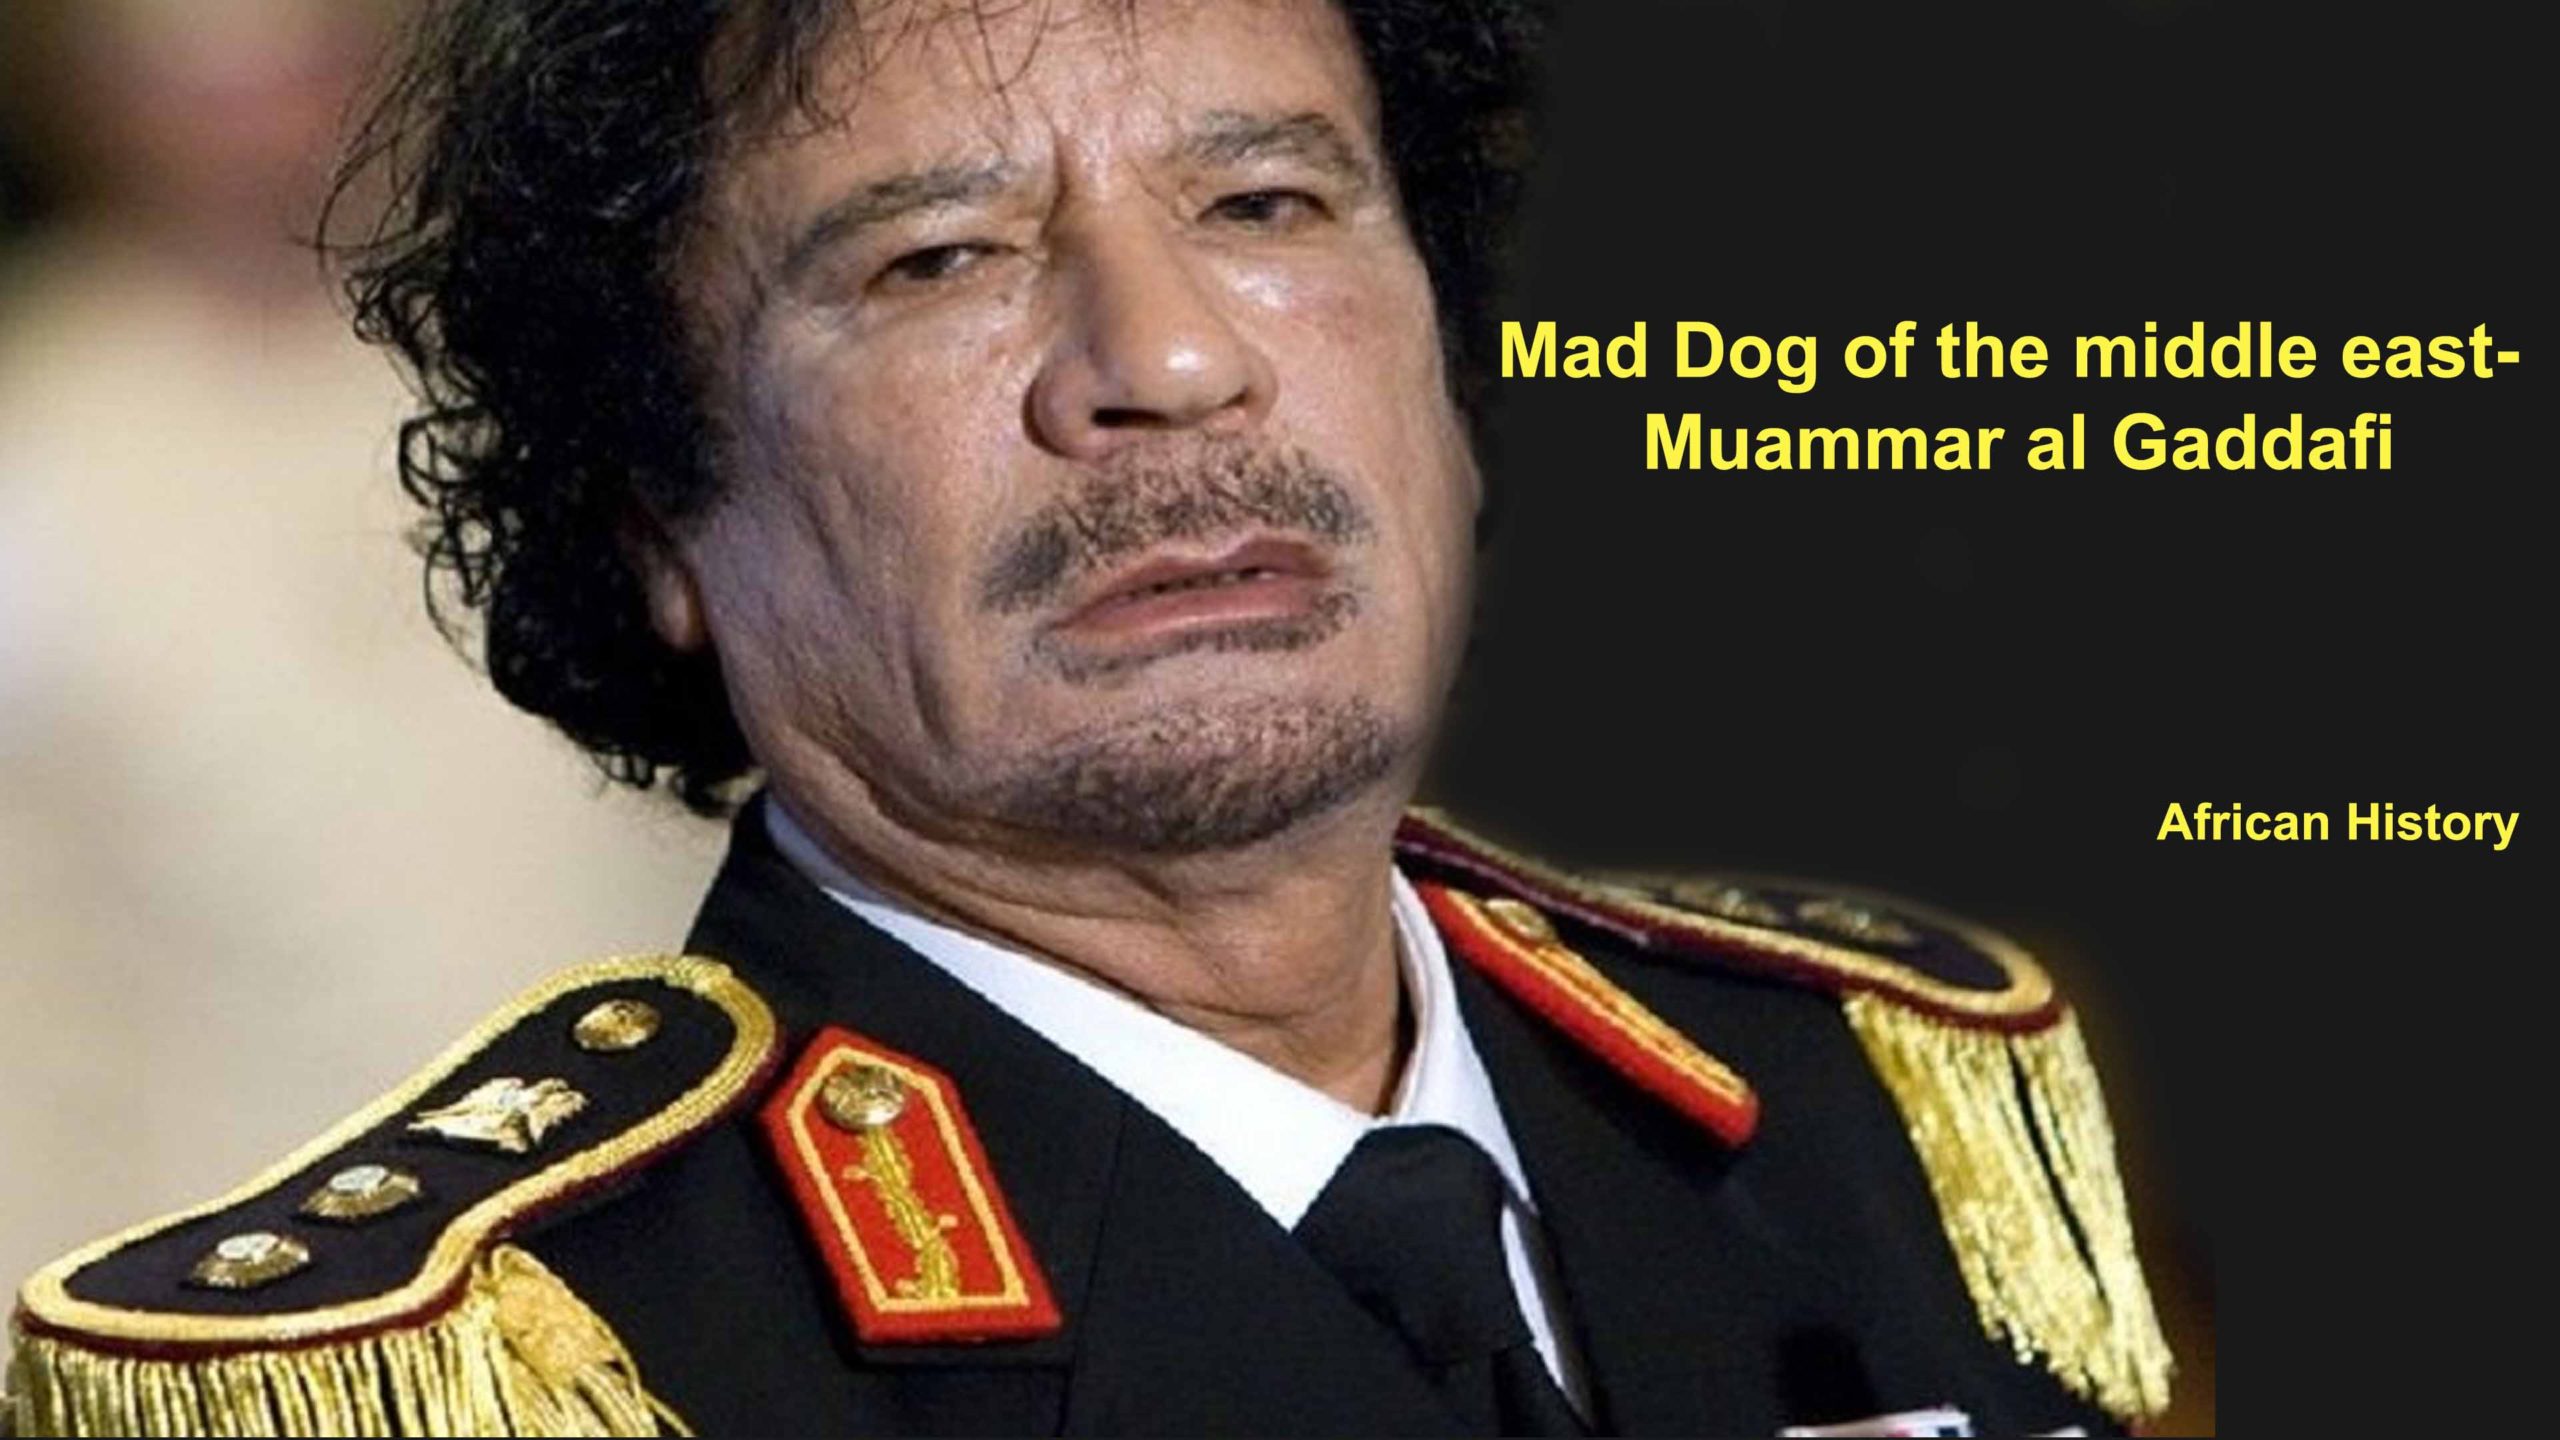 African History: Mad Dog of the middle east- Muammar al Gaddafi Afro News Wire